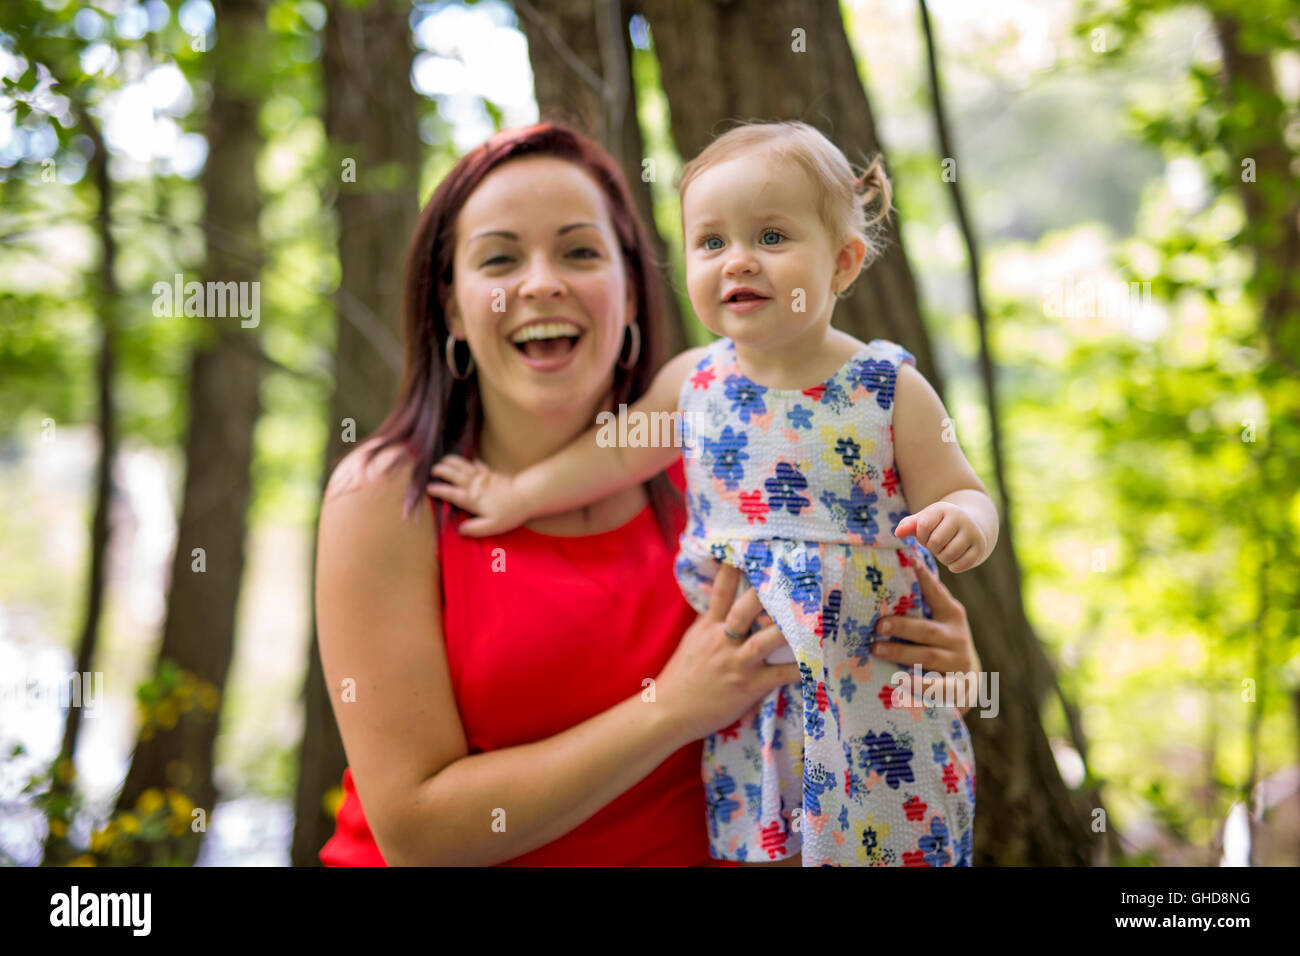 Mother and daughter in forest having fun Stock Photo